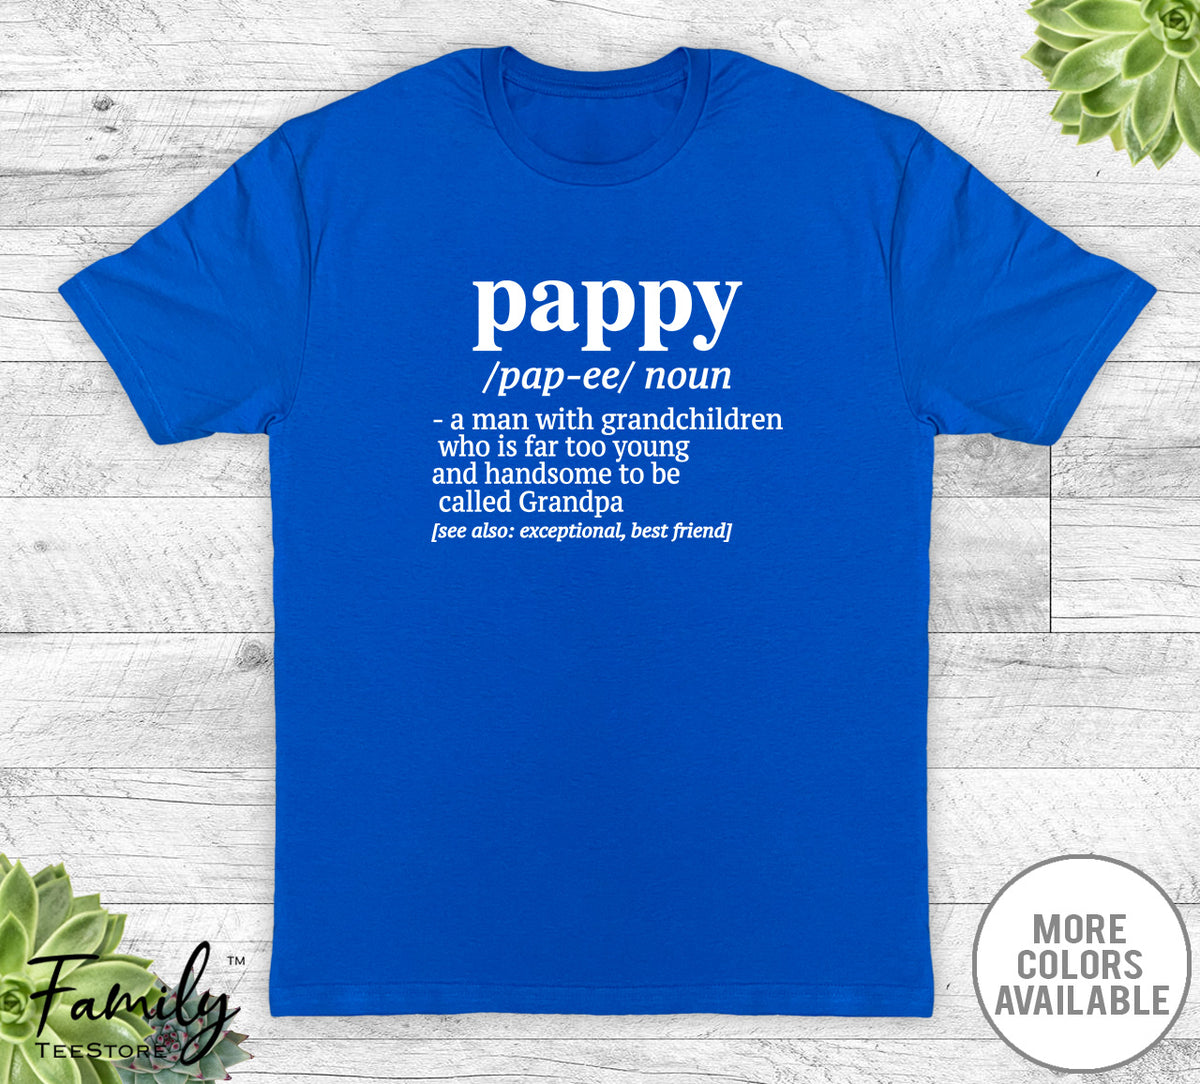 Pappy A Man with Grandchildren - unisex T-Shirt - Pappy Shirt - Pappy Gift Royal Blue / 3XLarge